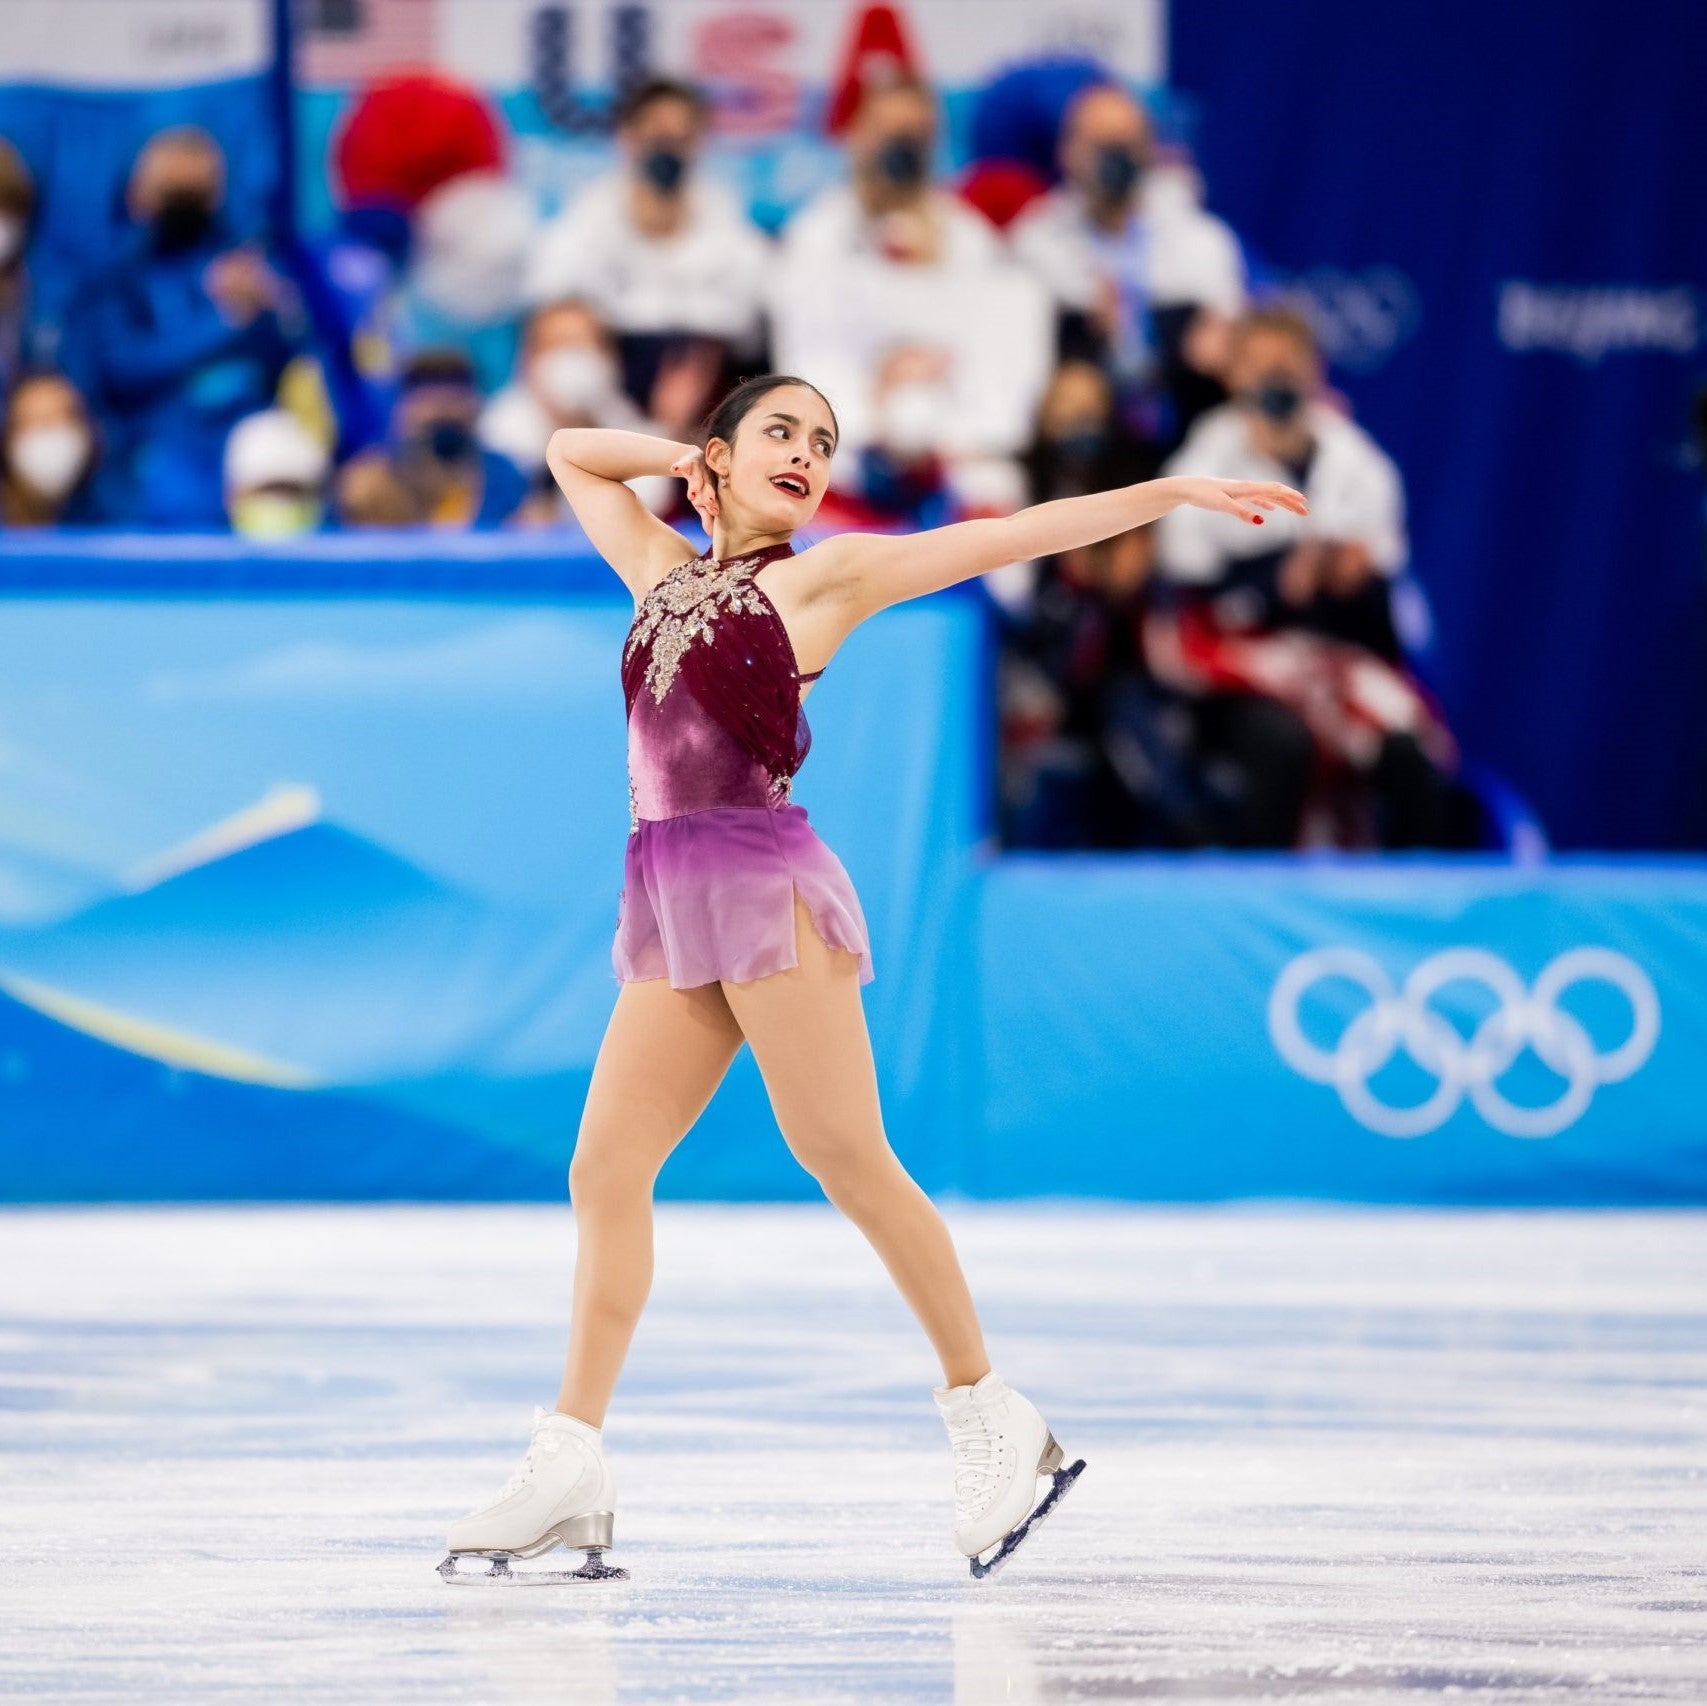 Madeline Schizas skating at the 2022 Winter Olympics